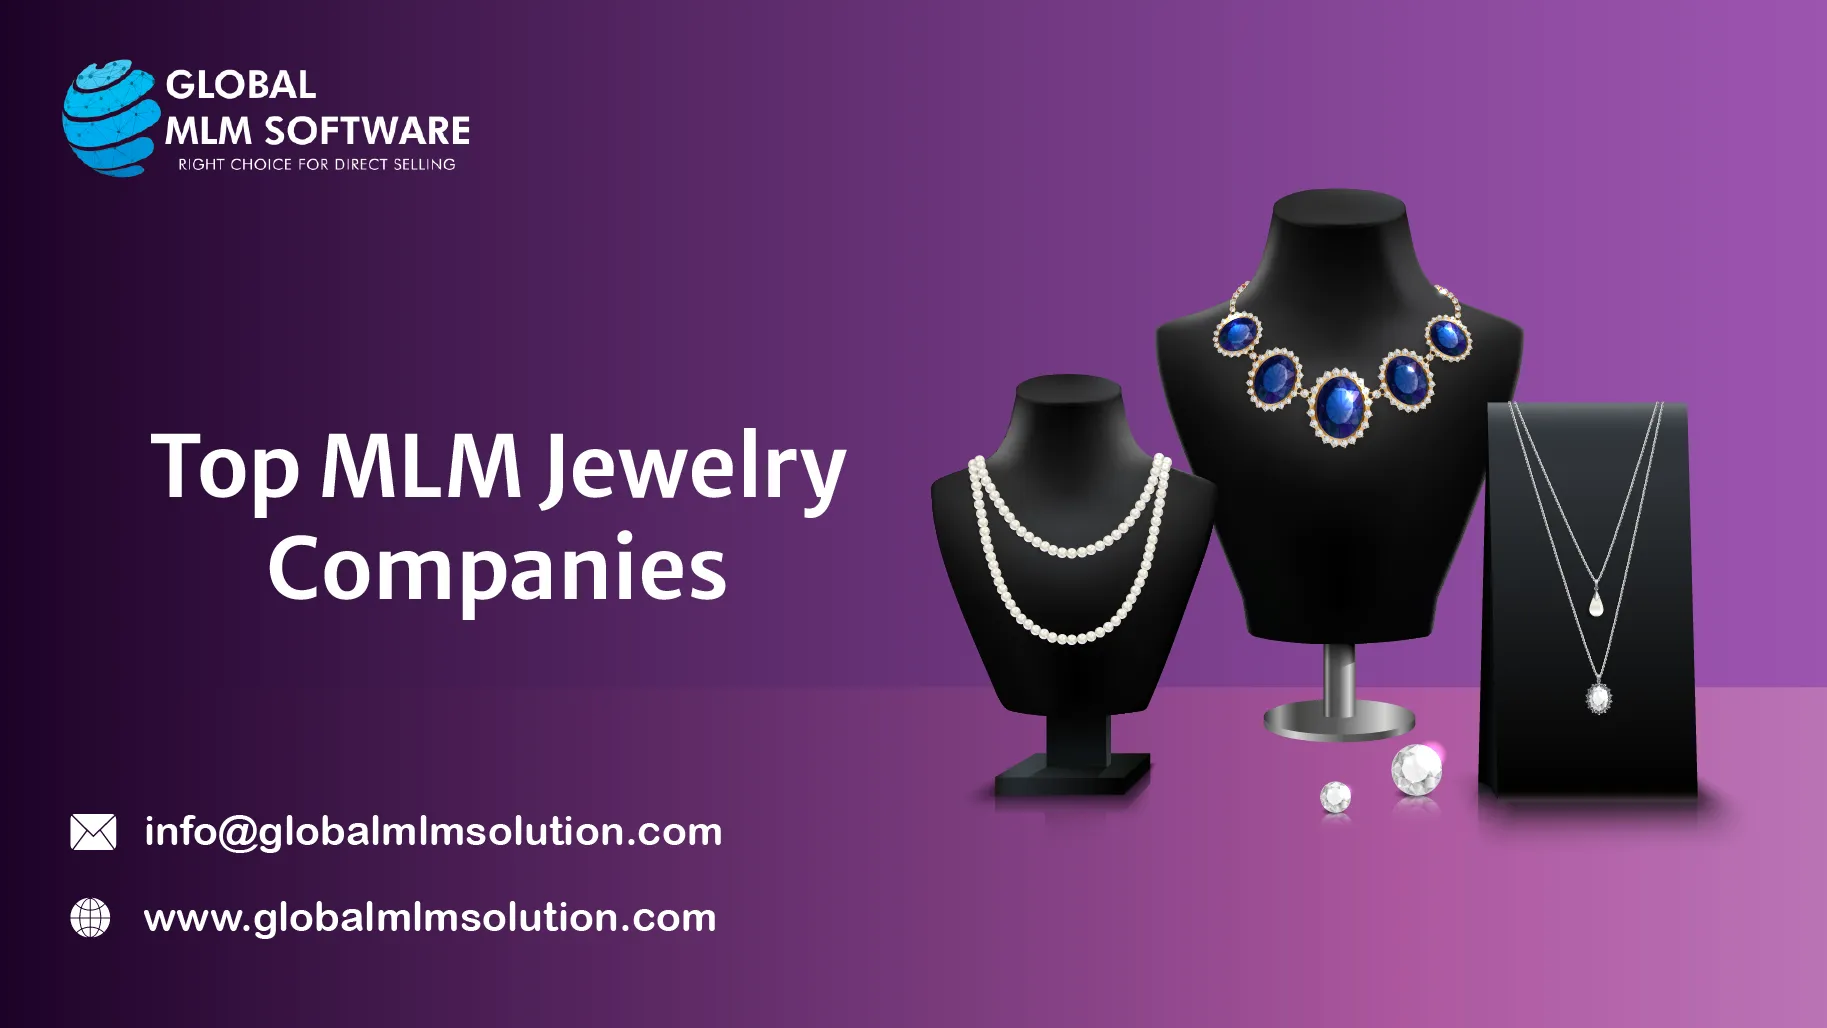 Top Direct Sale MLM Jewelry Companies in 2023